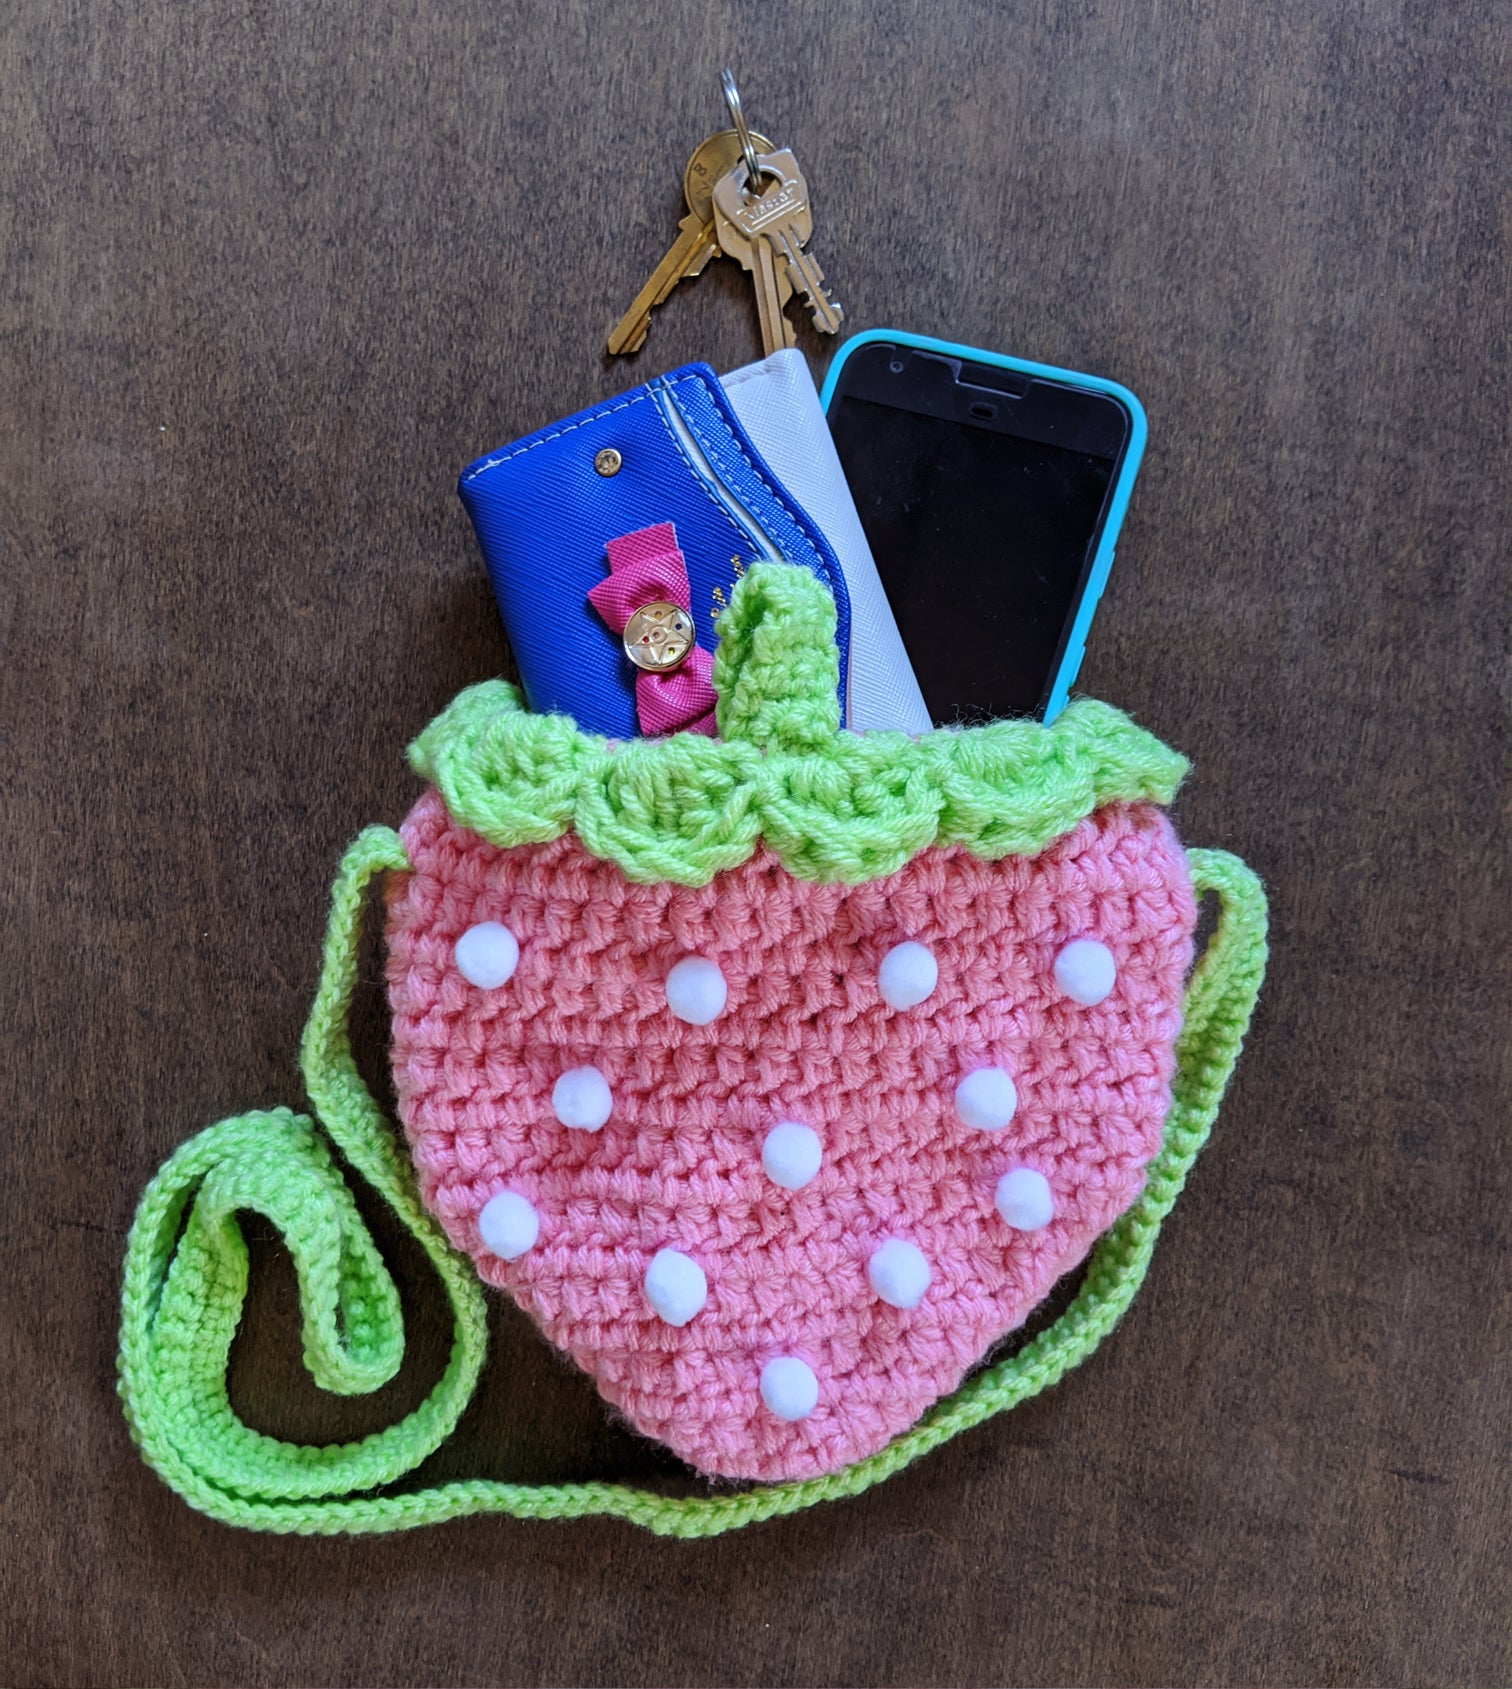 AEW The Quality Knitting Shop - Crochet strawberry bag @250฿ Handmade in  Thailand 🇹🇭 | Facebook